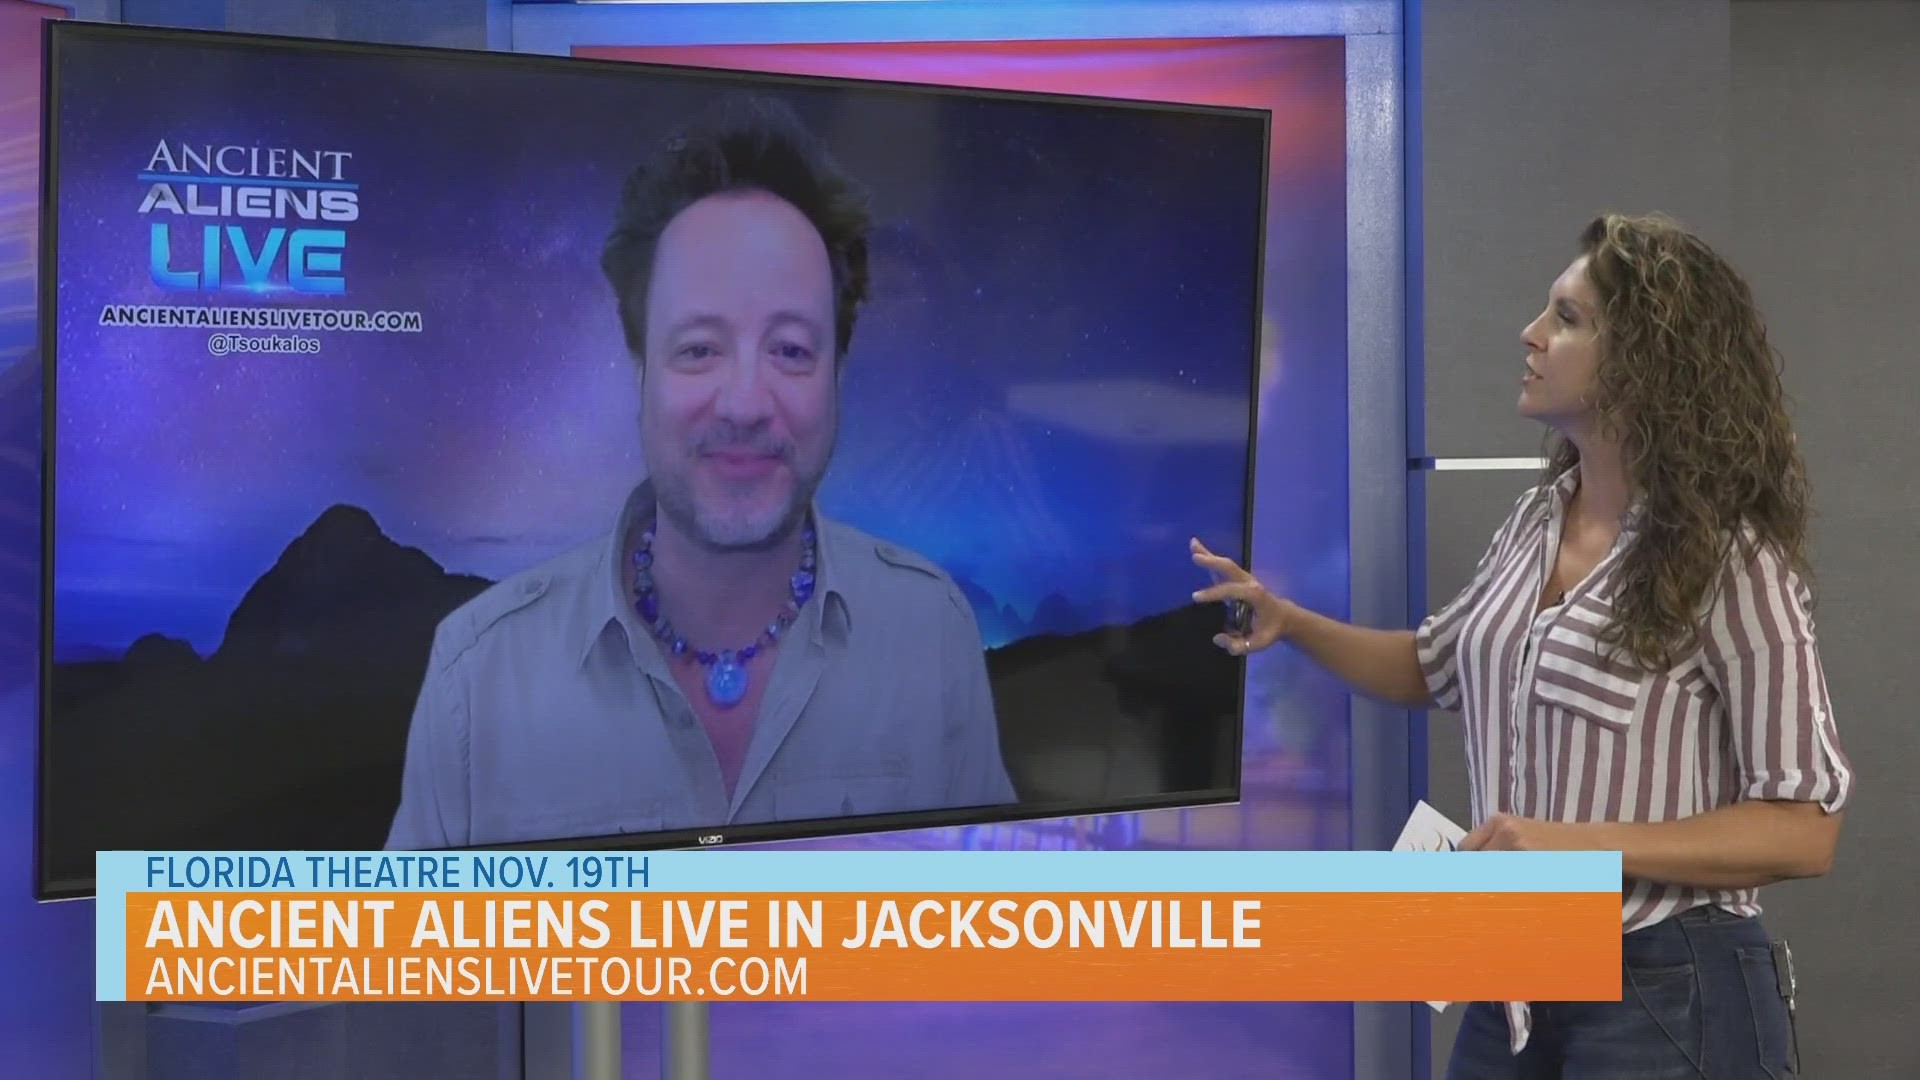 Ancient Aliens live in Jacksonville - Here's what you need to know